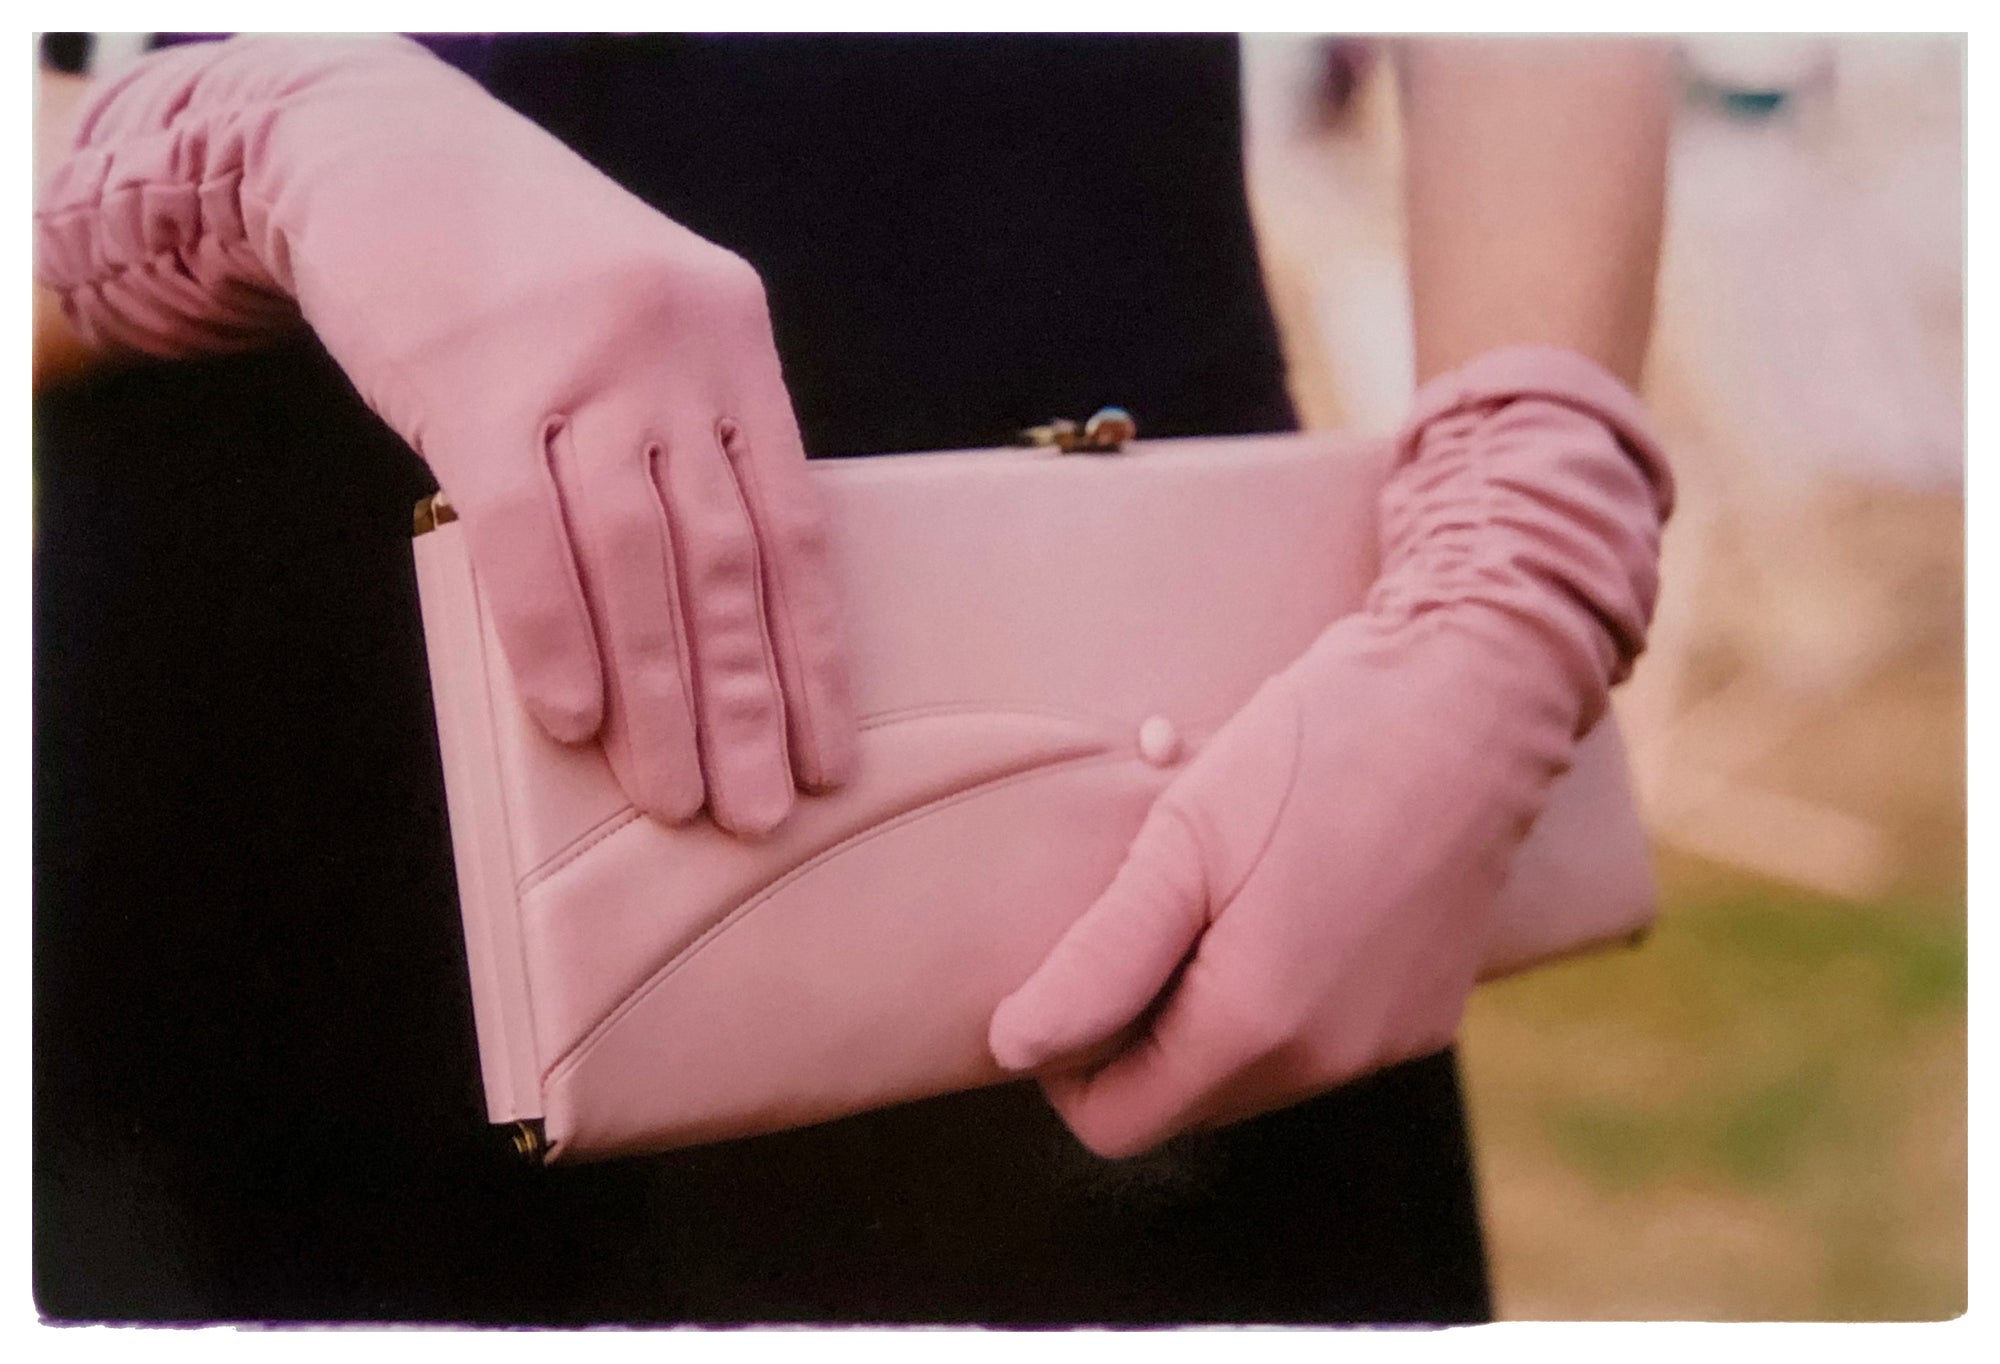 Photograph by Richard Heeps.  Pink clutch bag being held by matching pink gloved hands, set against the wearer's black dress.